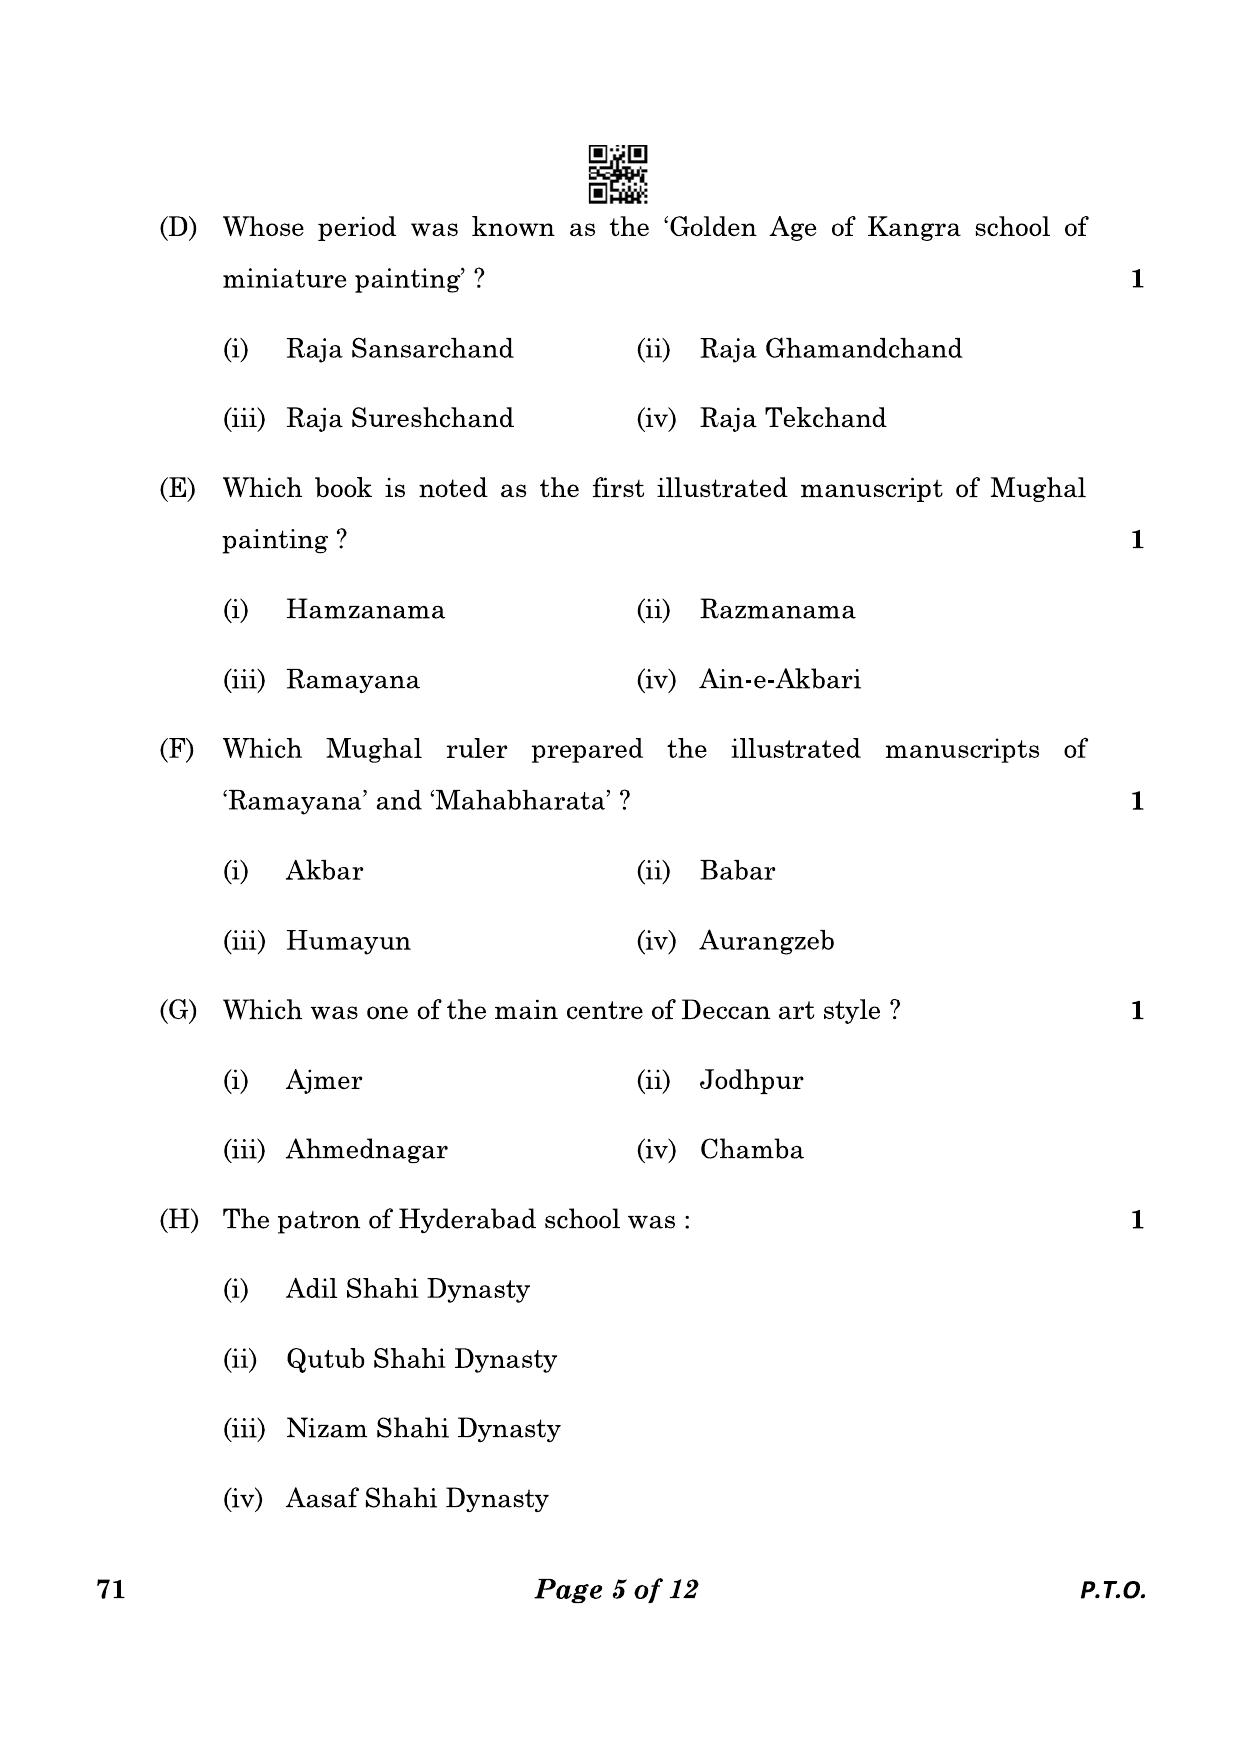 CBSE Class 12 71_Painting 2023 Question Paper - Page 5